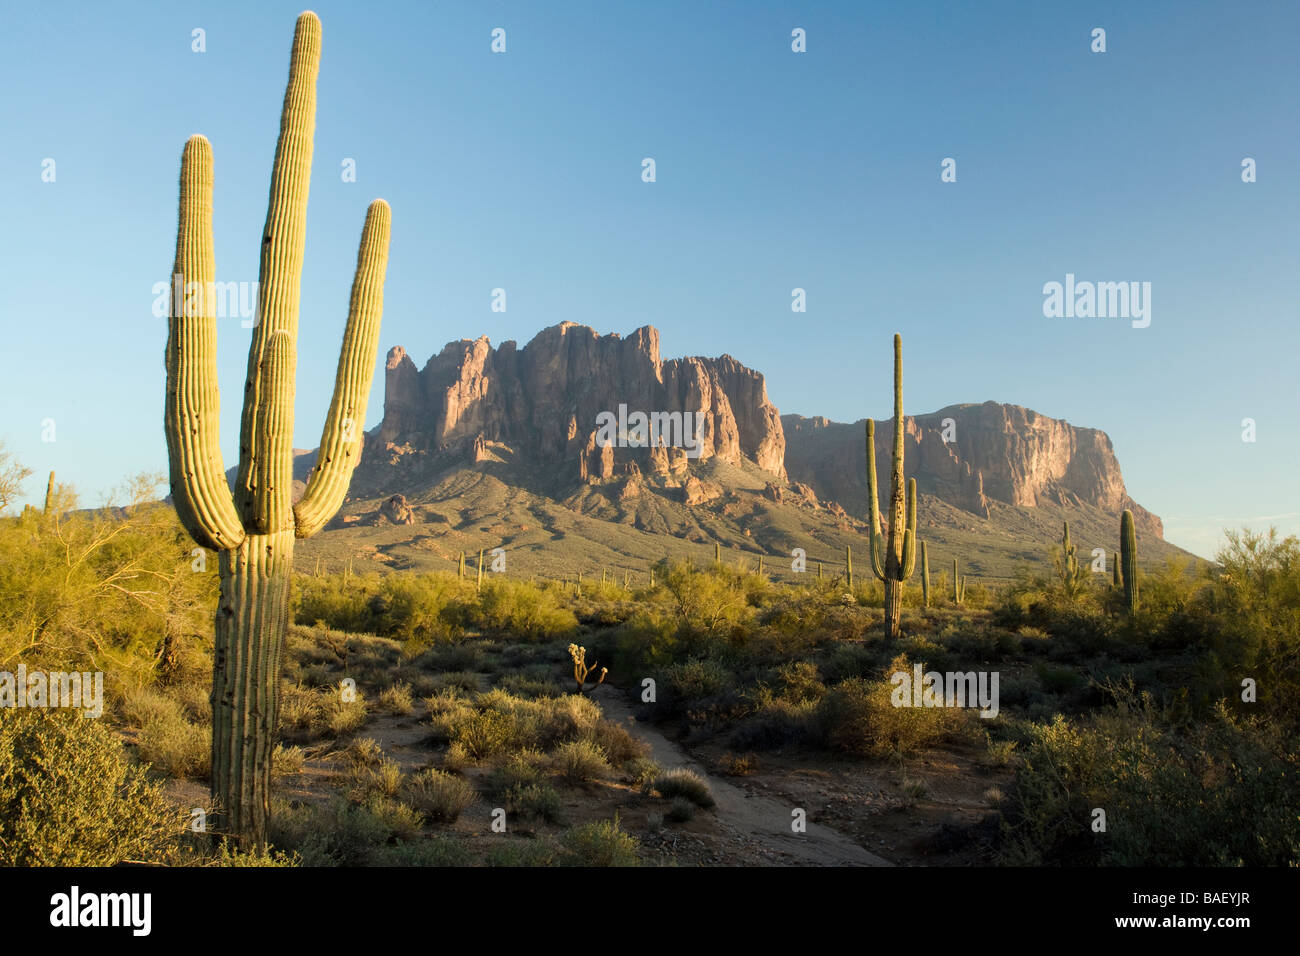 Saguaro Cactus and Superstition Mountains - Lost Dutchman State Park - Apache Junction, Arizona Stock Photo